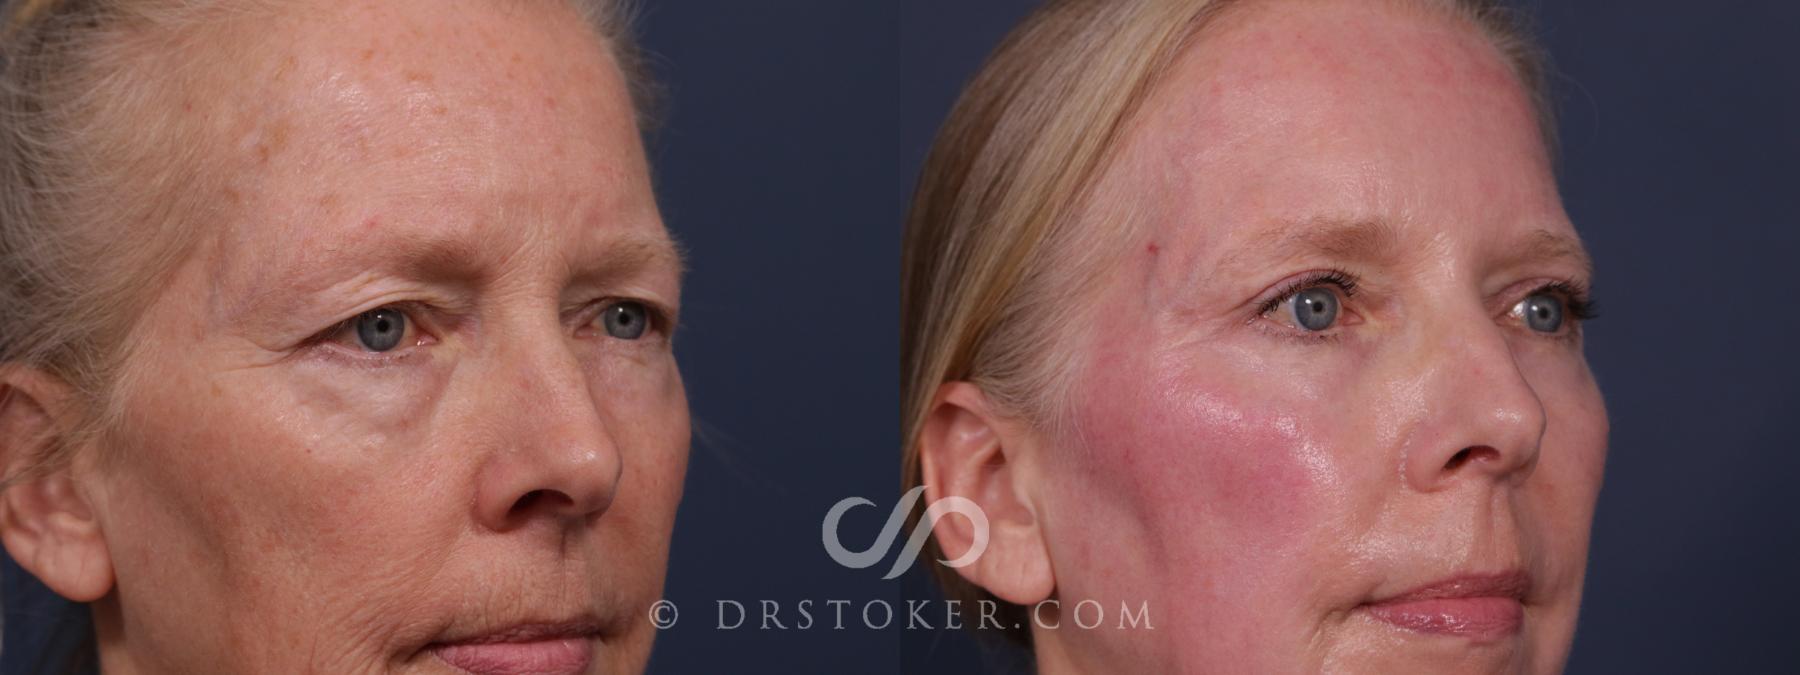 Before & After Eyelid Surgery Case 2190 Right Oblique View in Los Angeles, CA